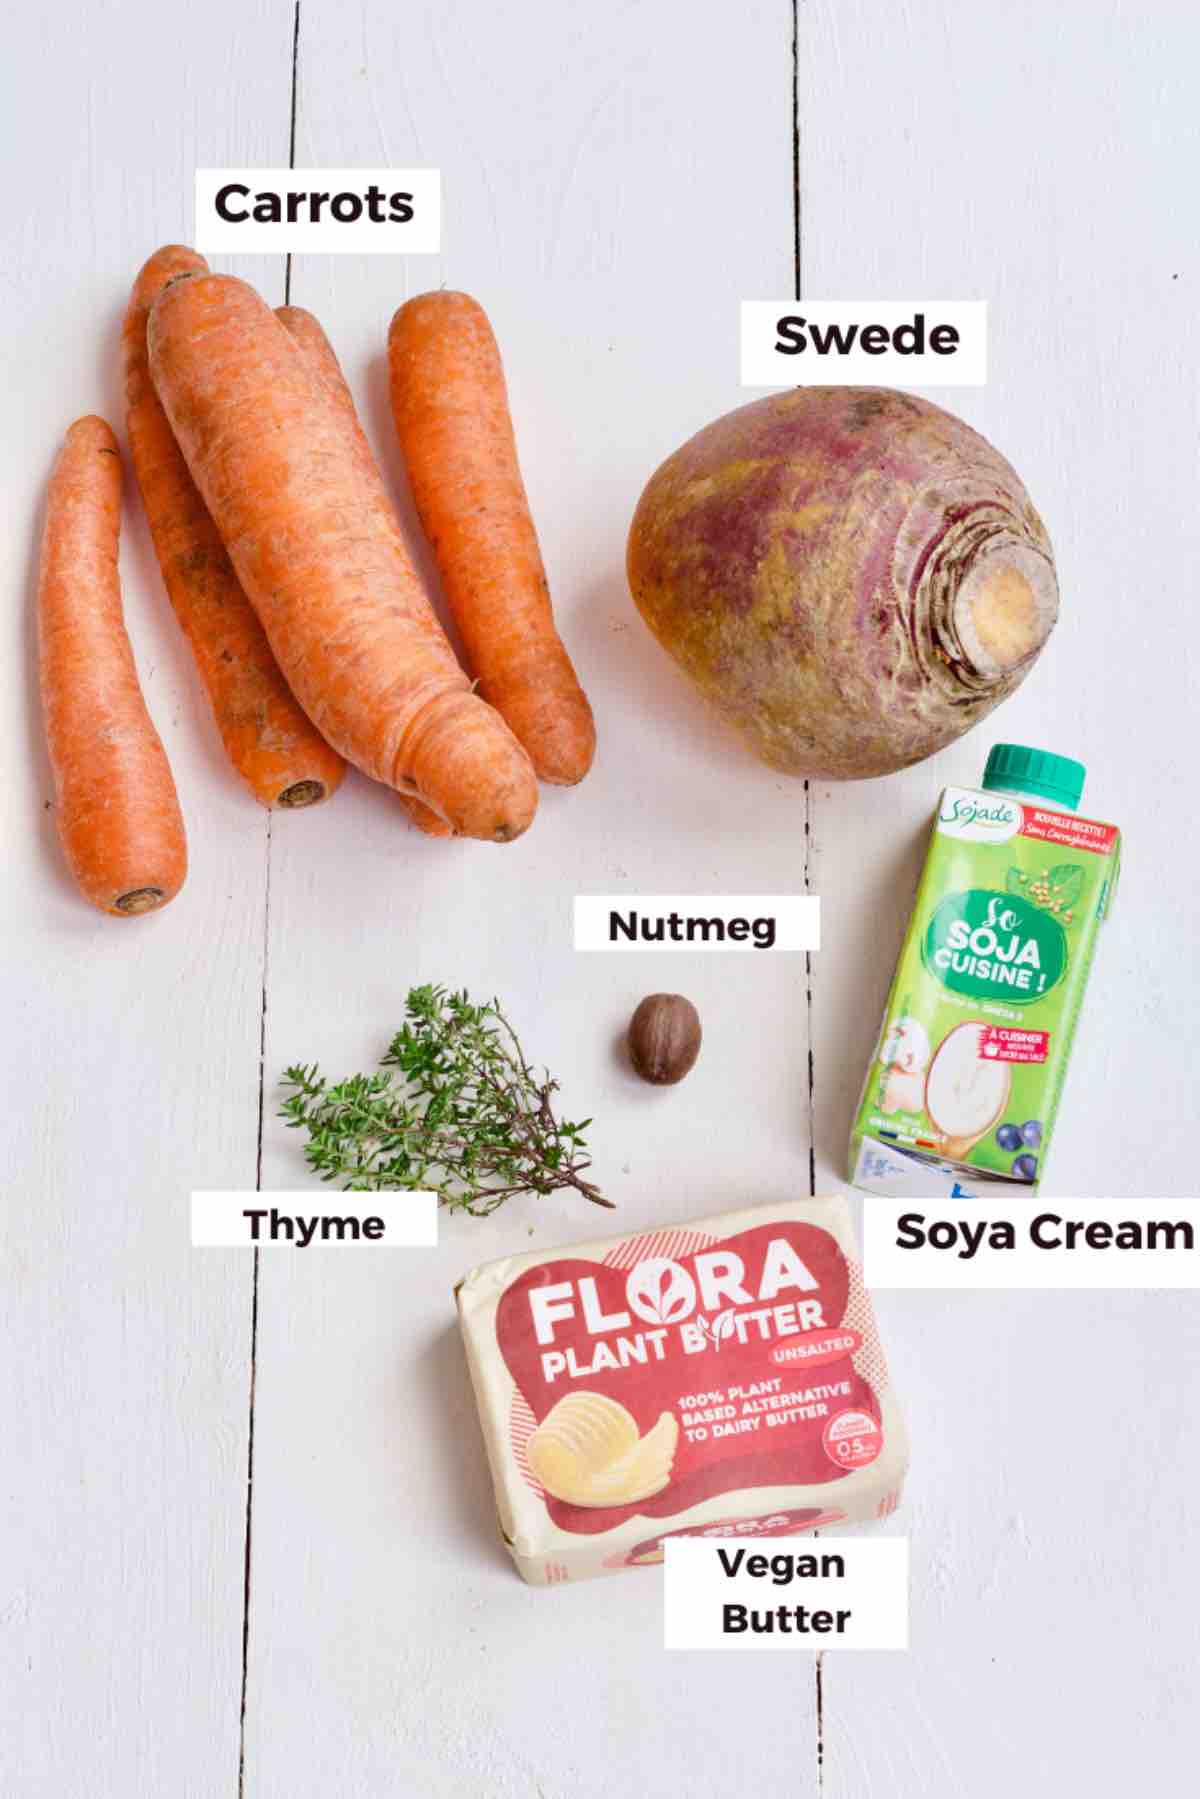 Ingredients for making carrot and swede mash.